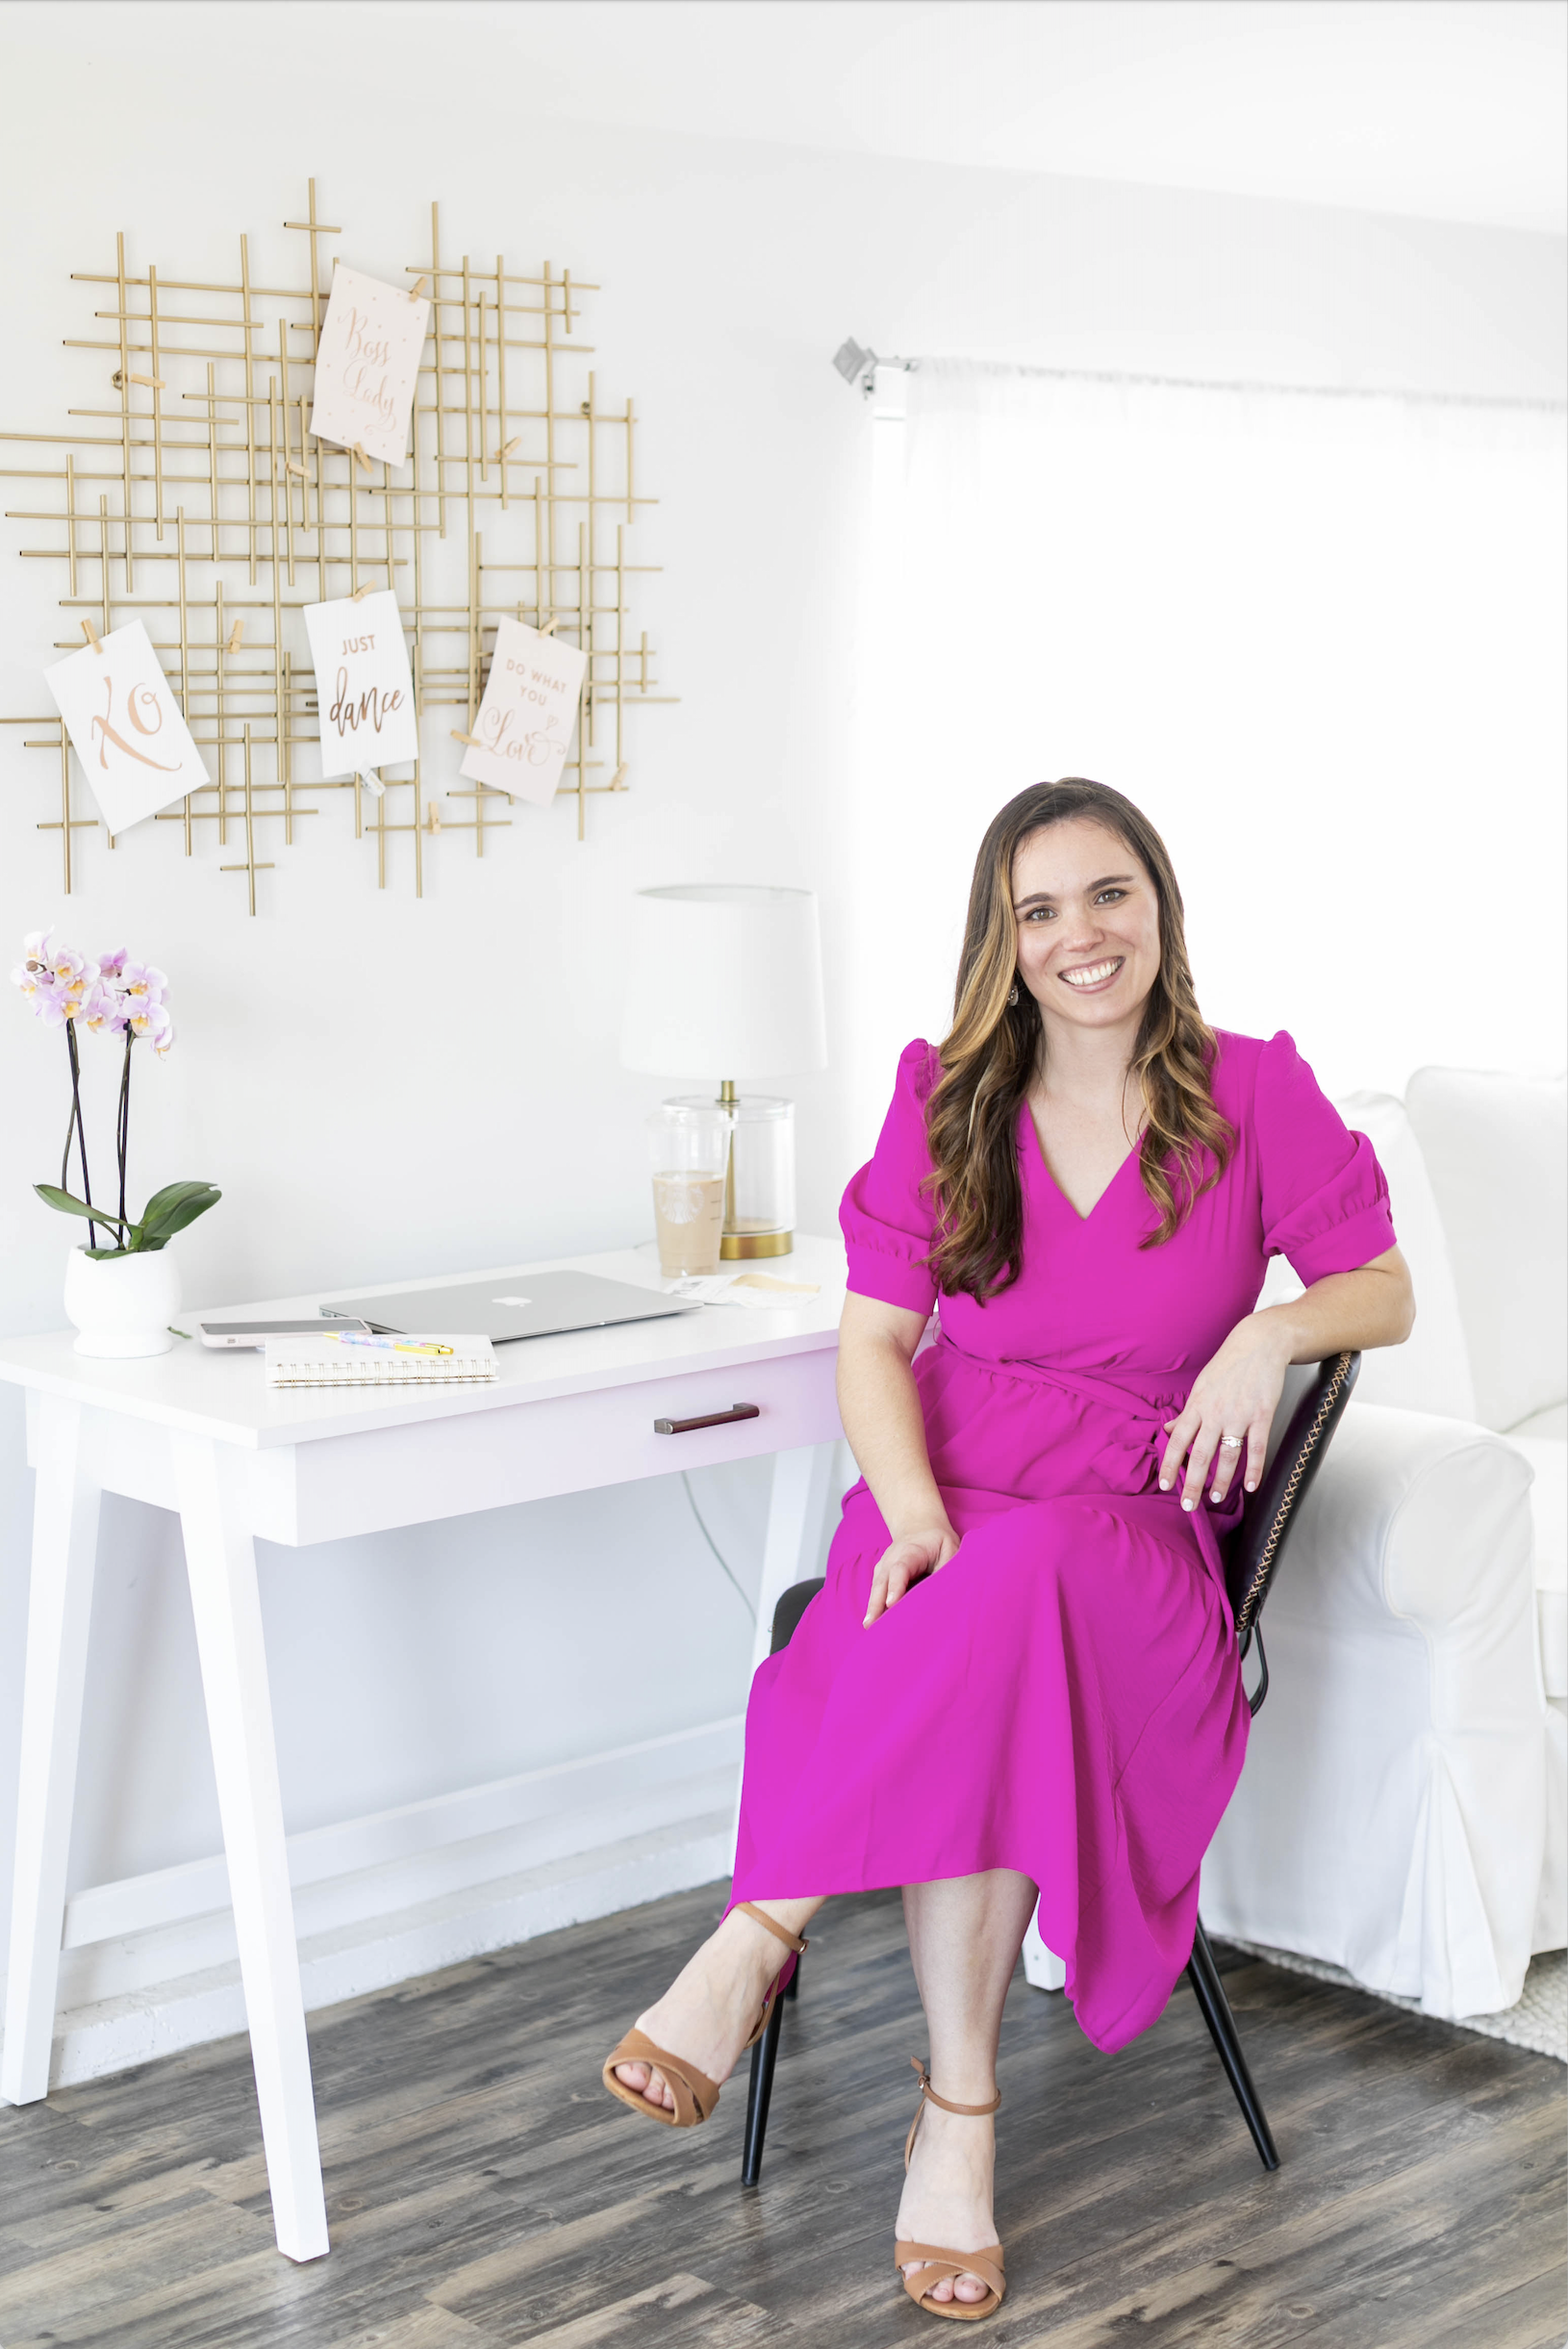 Wedding Planners Make All the Difference: Interview with Casey Stamouli of Casey & Co on Wedding Secrets Unveiled! podcast